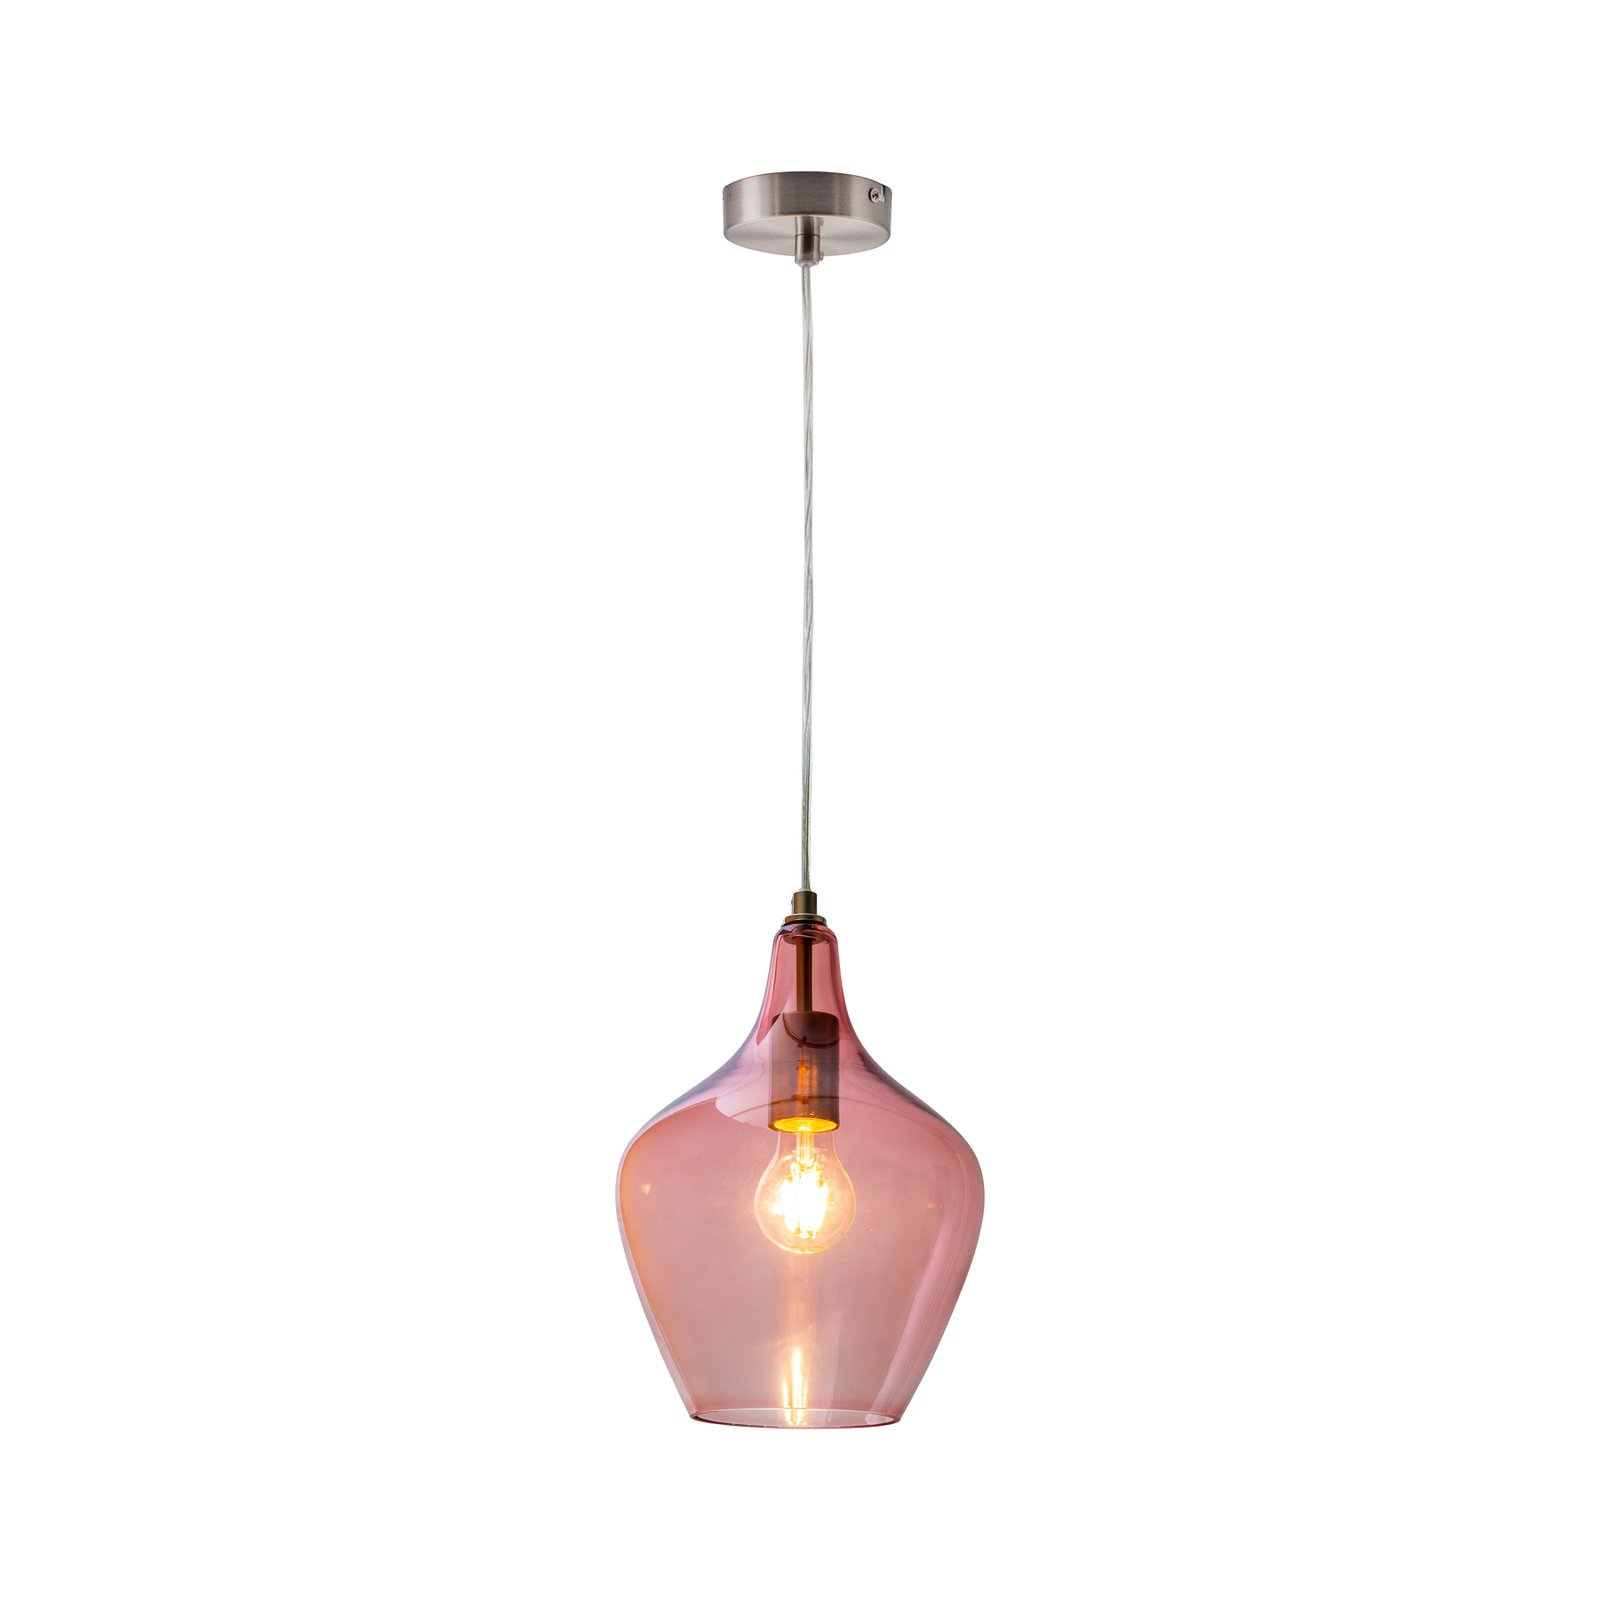 Paso hanging light made of glass, 1-bulb, rose